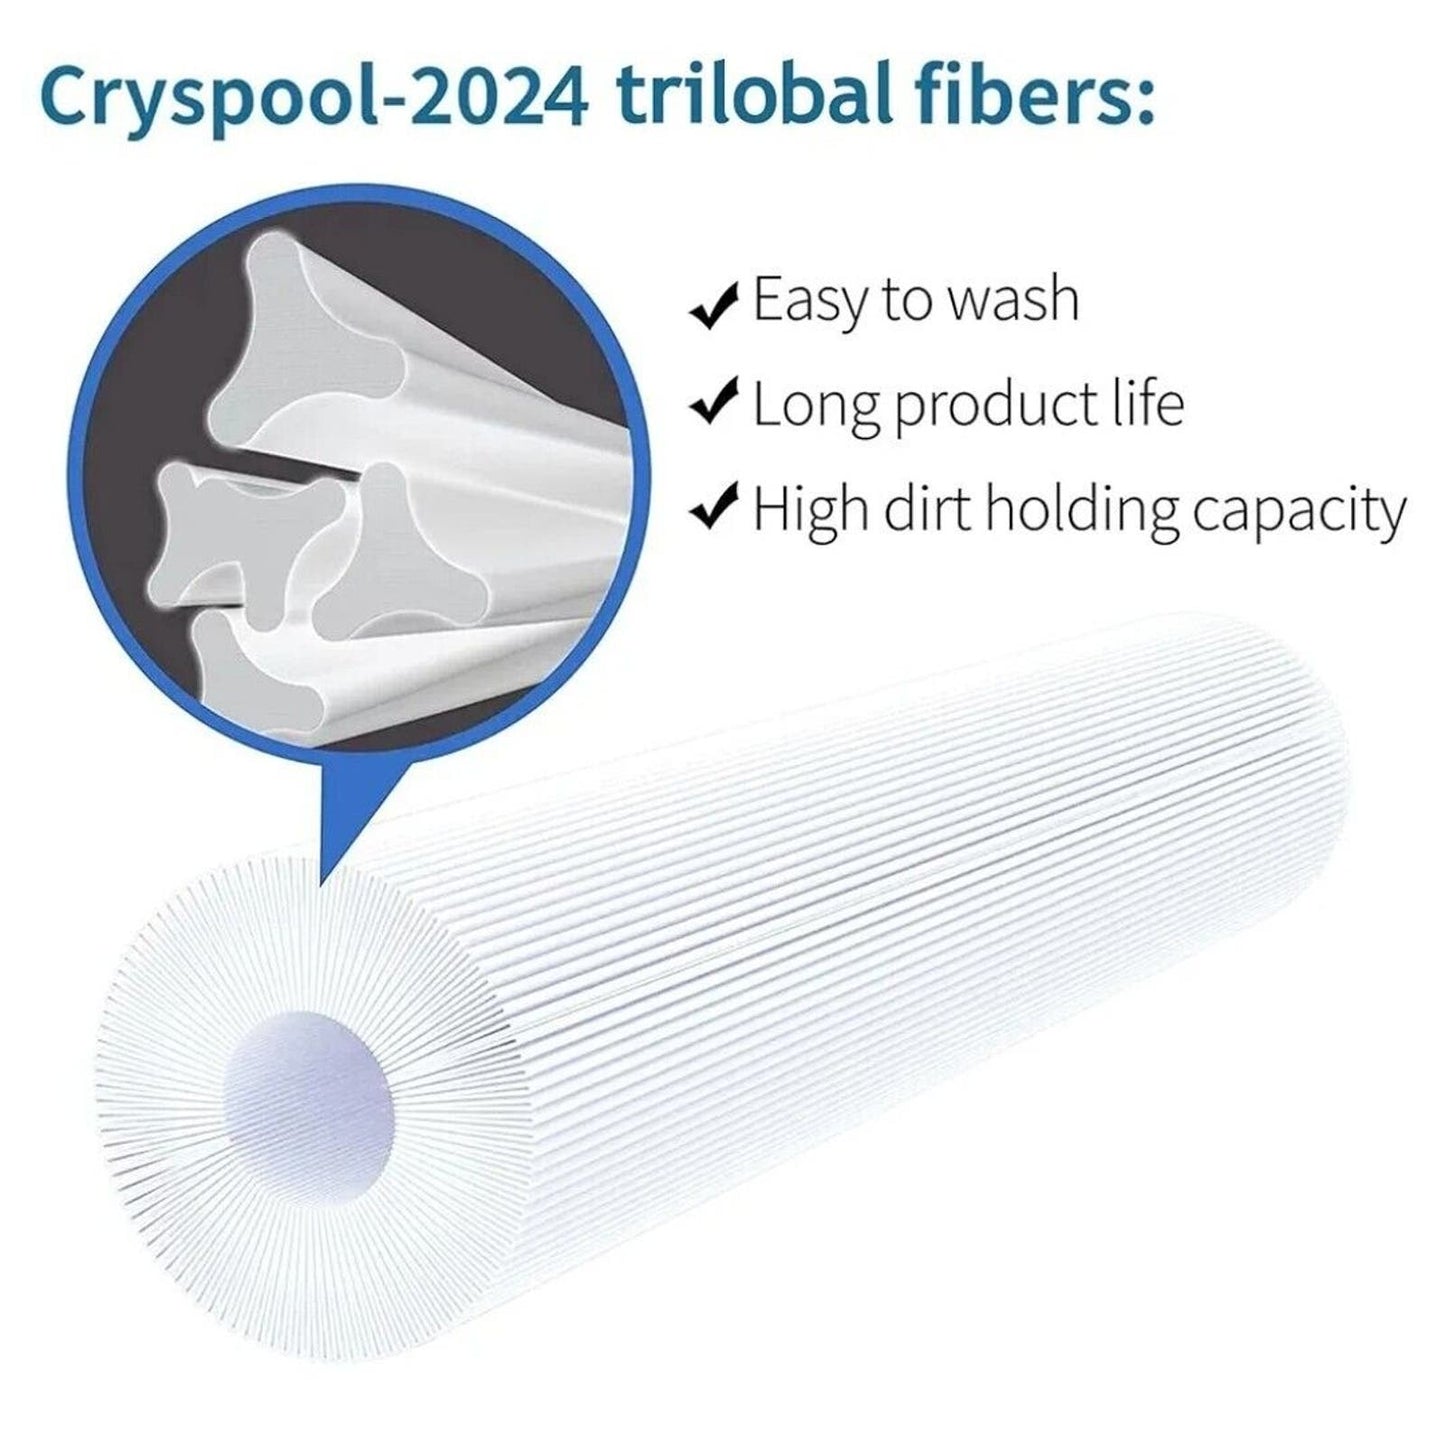 Cryspool CP-08056 Pool Filter for Jandy CS150 X-Stream CC1500 Pro Clean 150